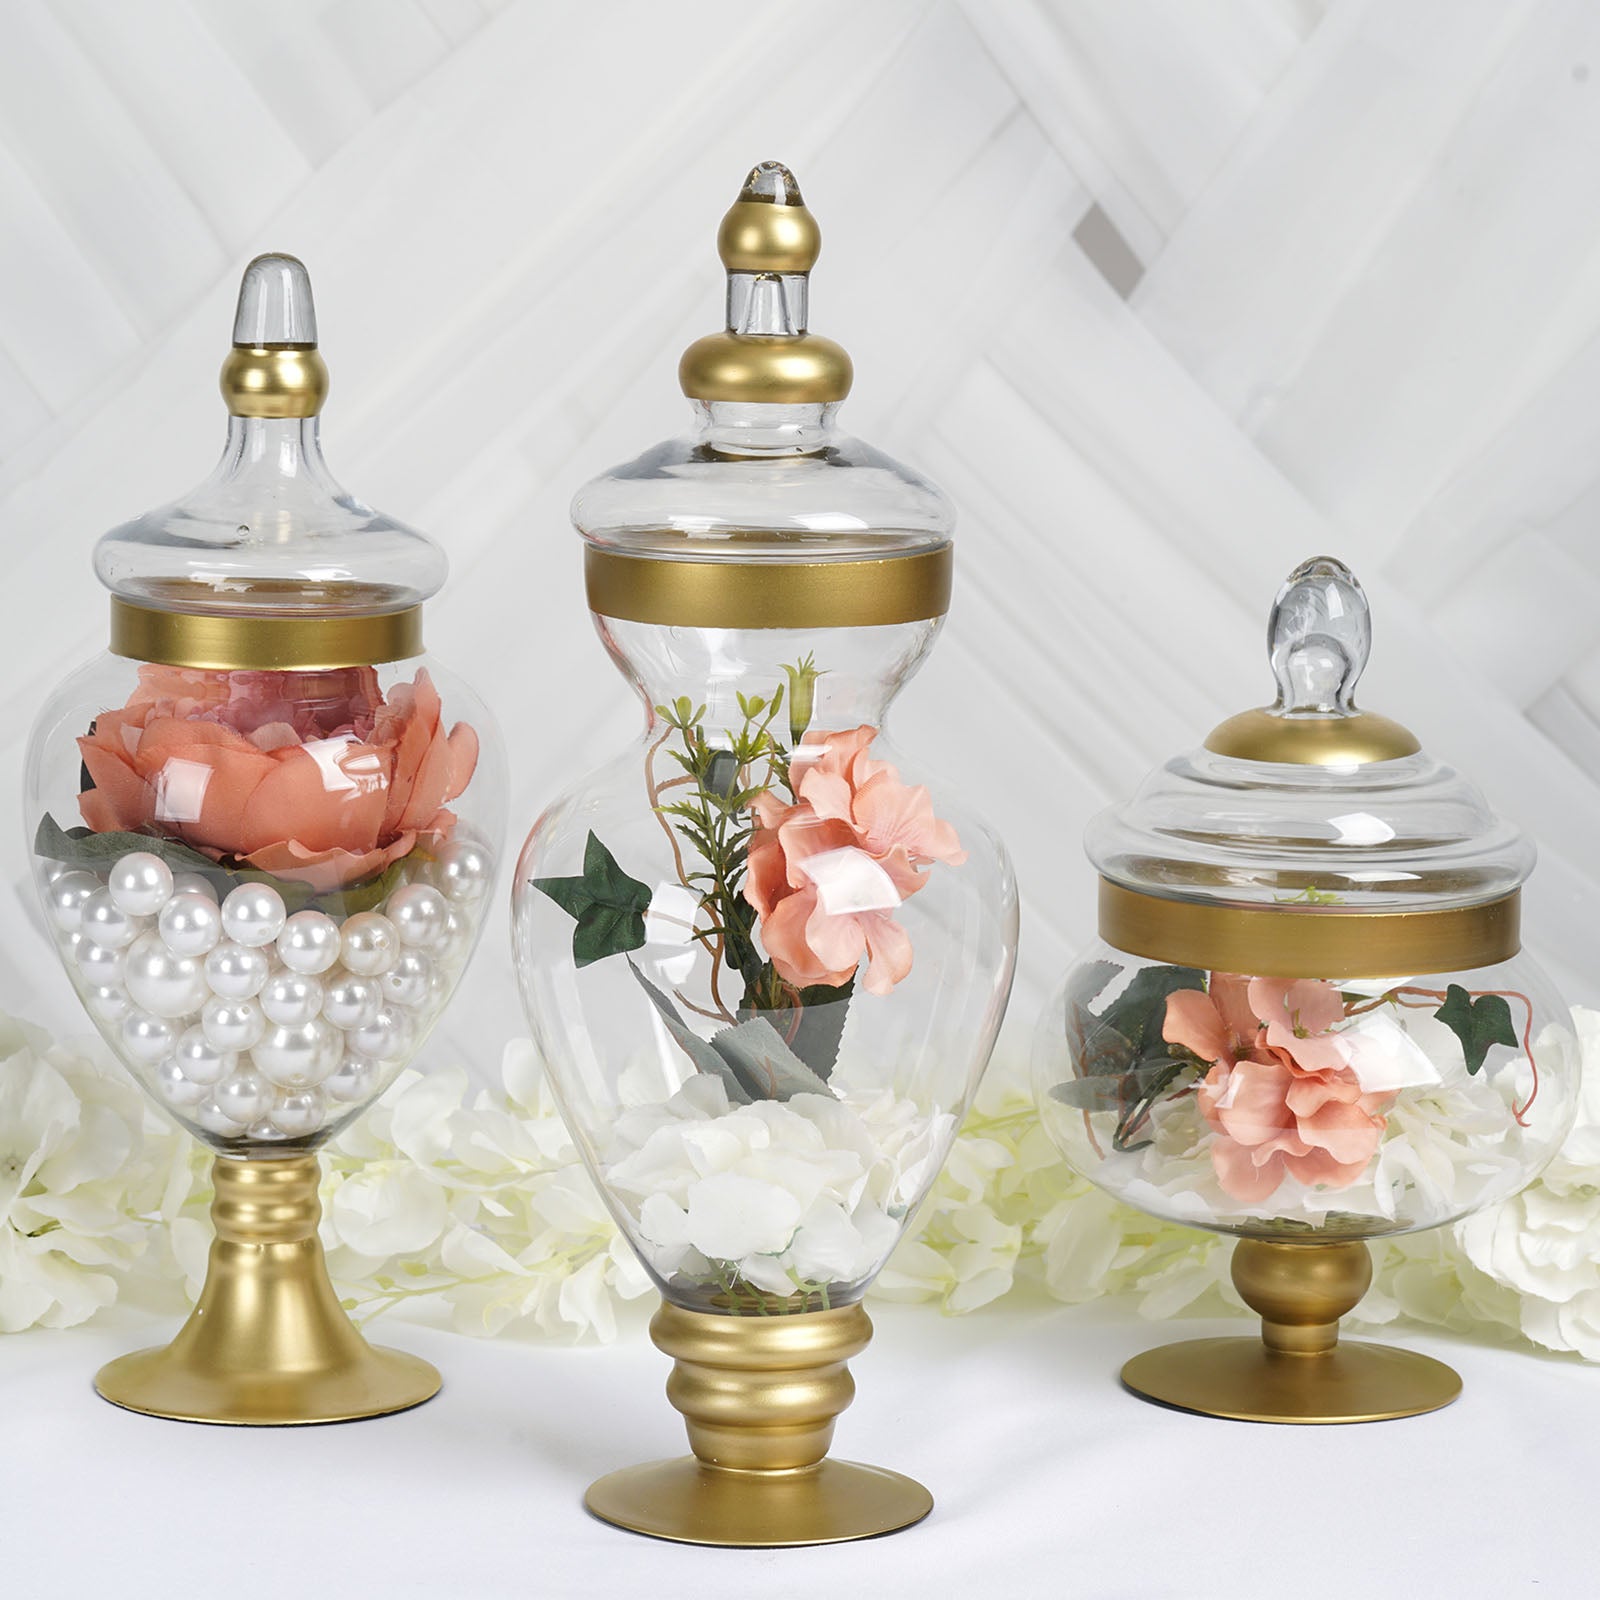 https://tableclothsfactory.com/cdn/shop/products/Large-Gold-Trim-Glass-Apothecary-Party-Favor-Candy-Jars-With-Snap-On-Lids.jpg?v=1689407455